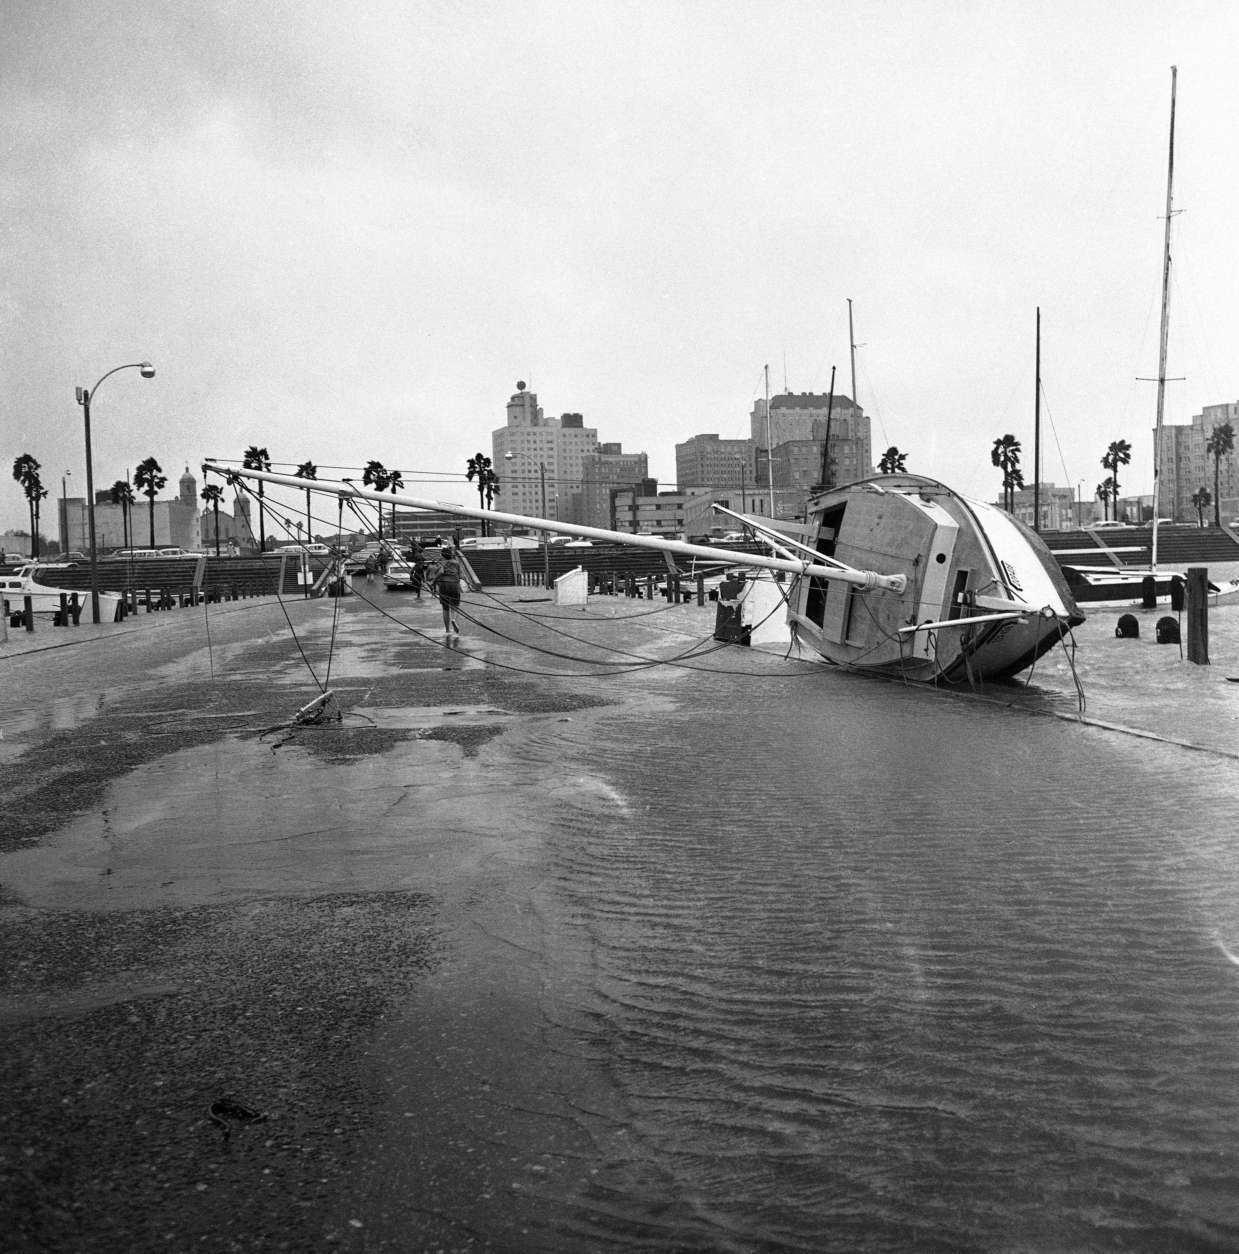 Sail boat rests on its side on a T-Head in Corpus Christi Bay on Sept. 11, 1961. The boat was blown on the pier during the hurricane winds that accompanied hurricane Carla. Downtown Corpus Christi can be seen in the background. (AP Photo/Ferd Kaufman)